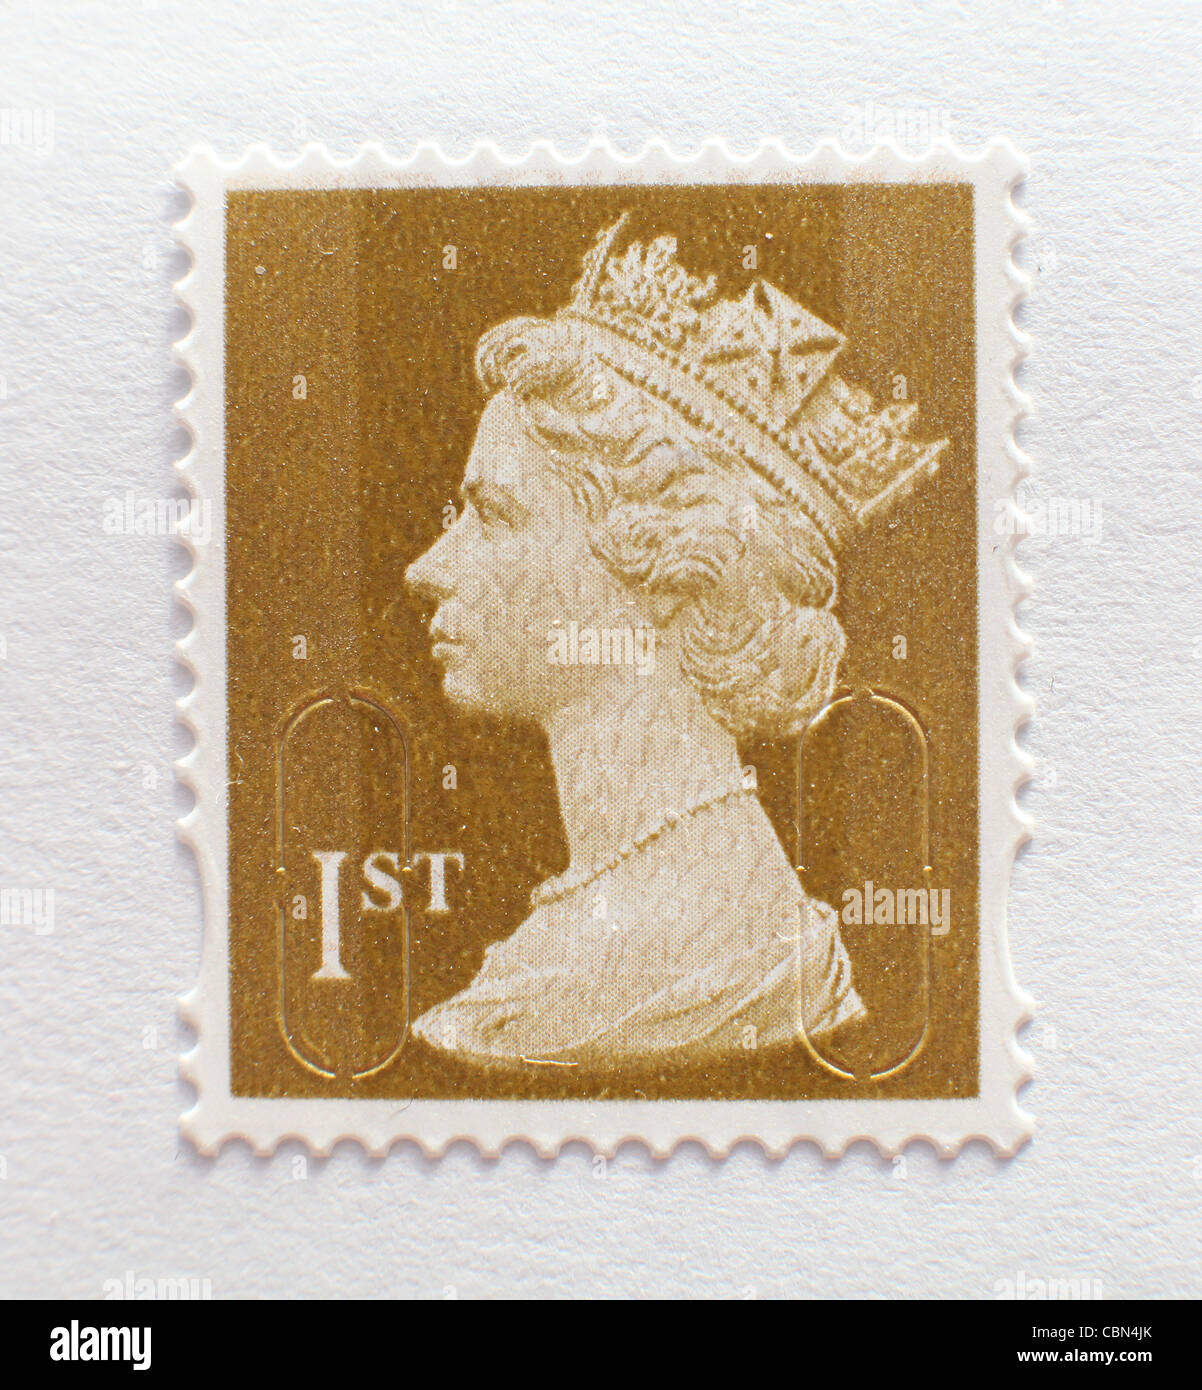 Envelope with a Royal Mail 1st class stamp. Picture by James Boardman. Stock Photo